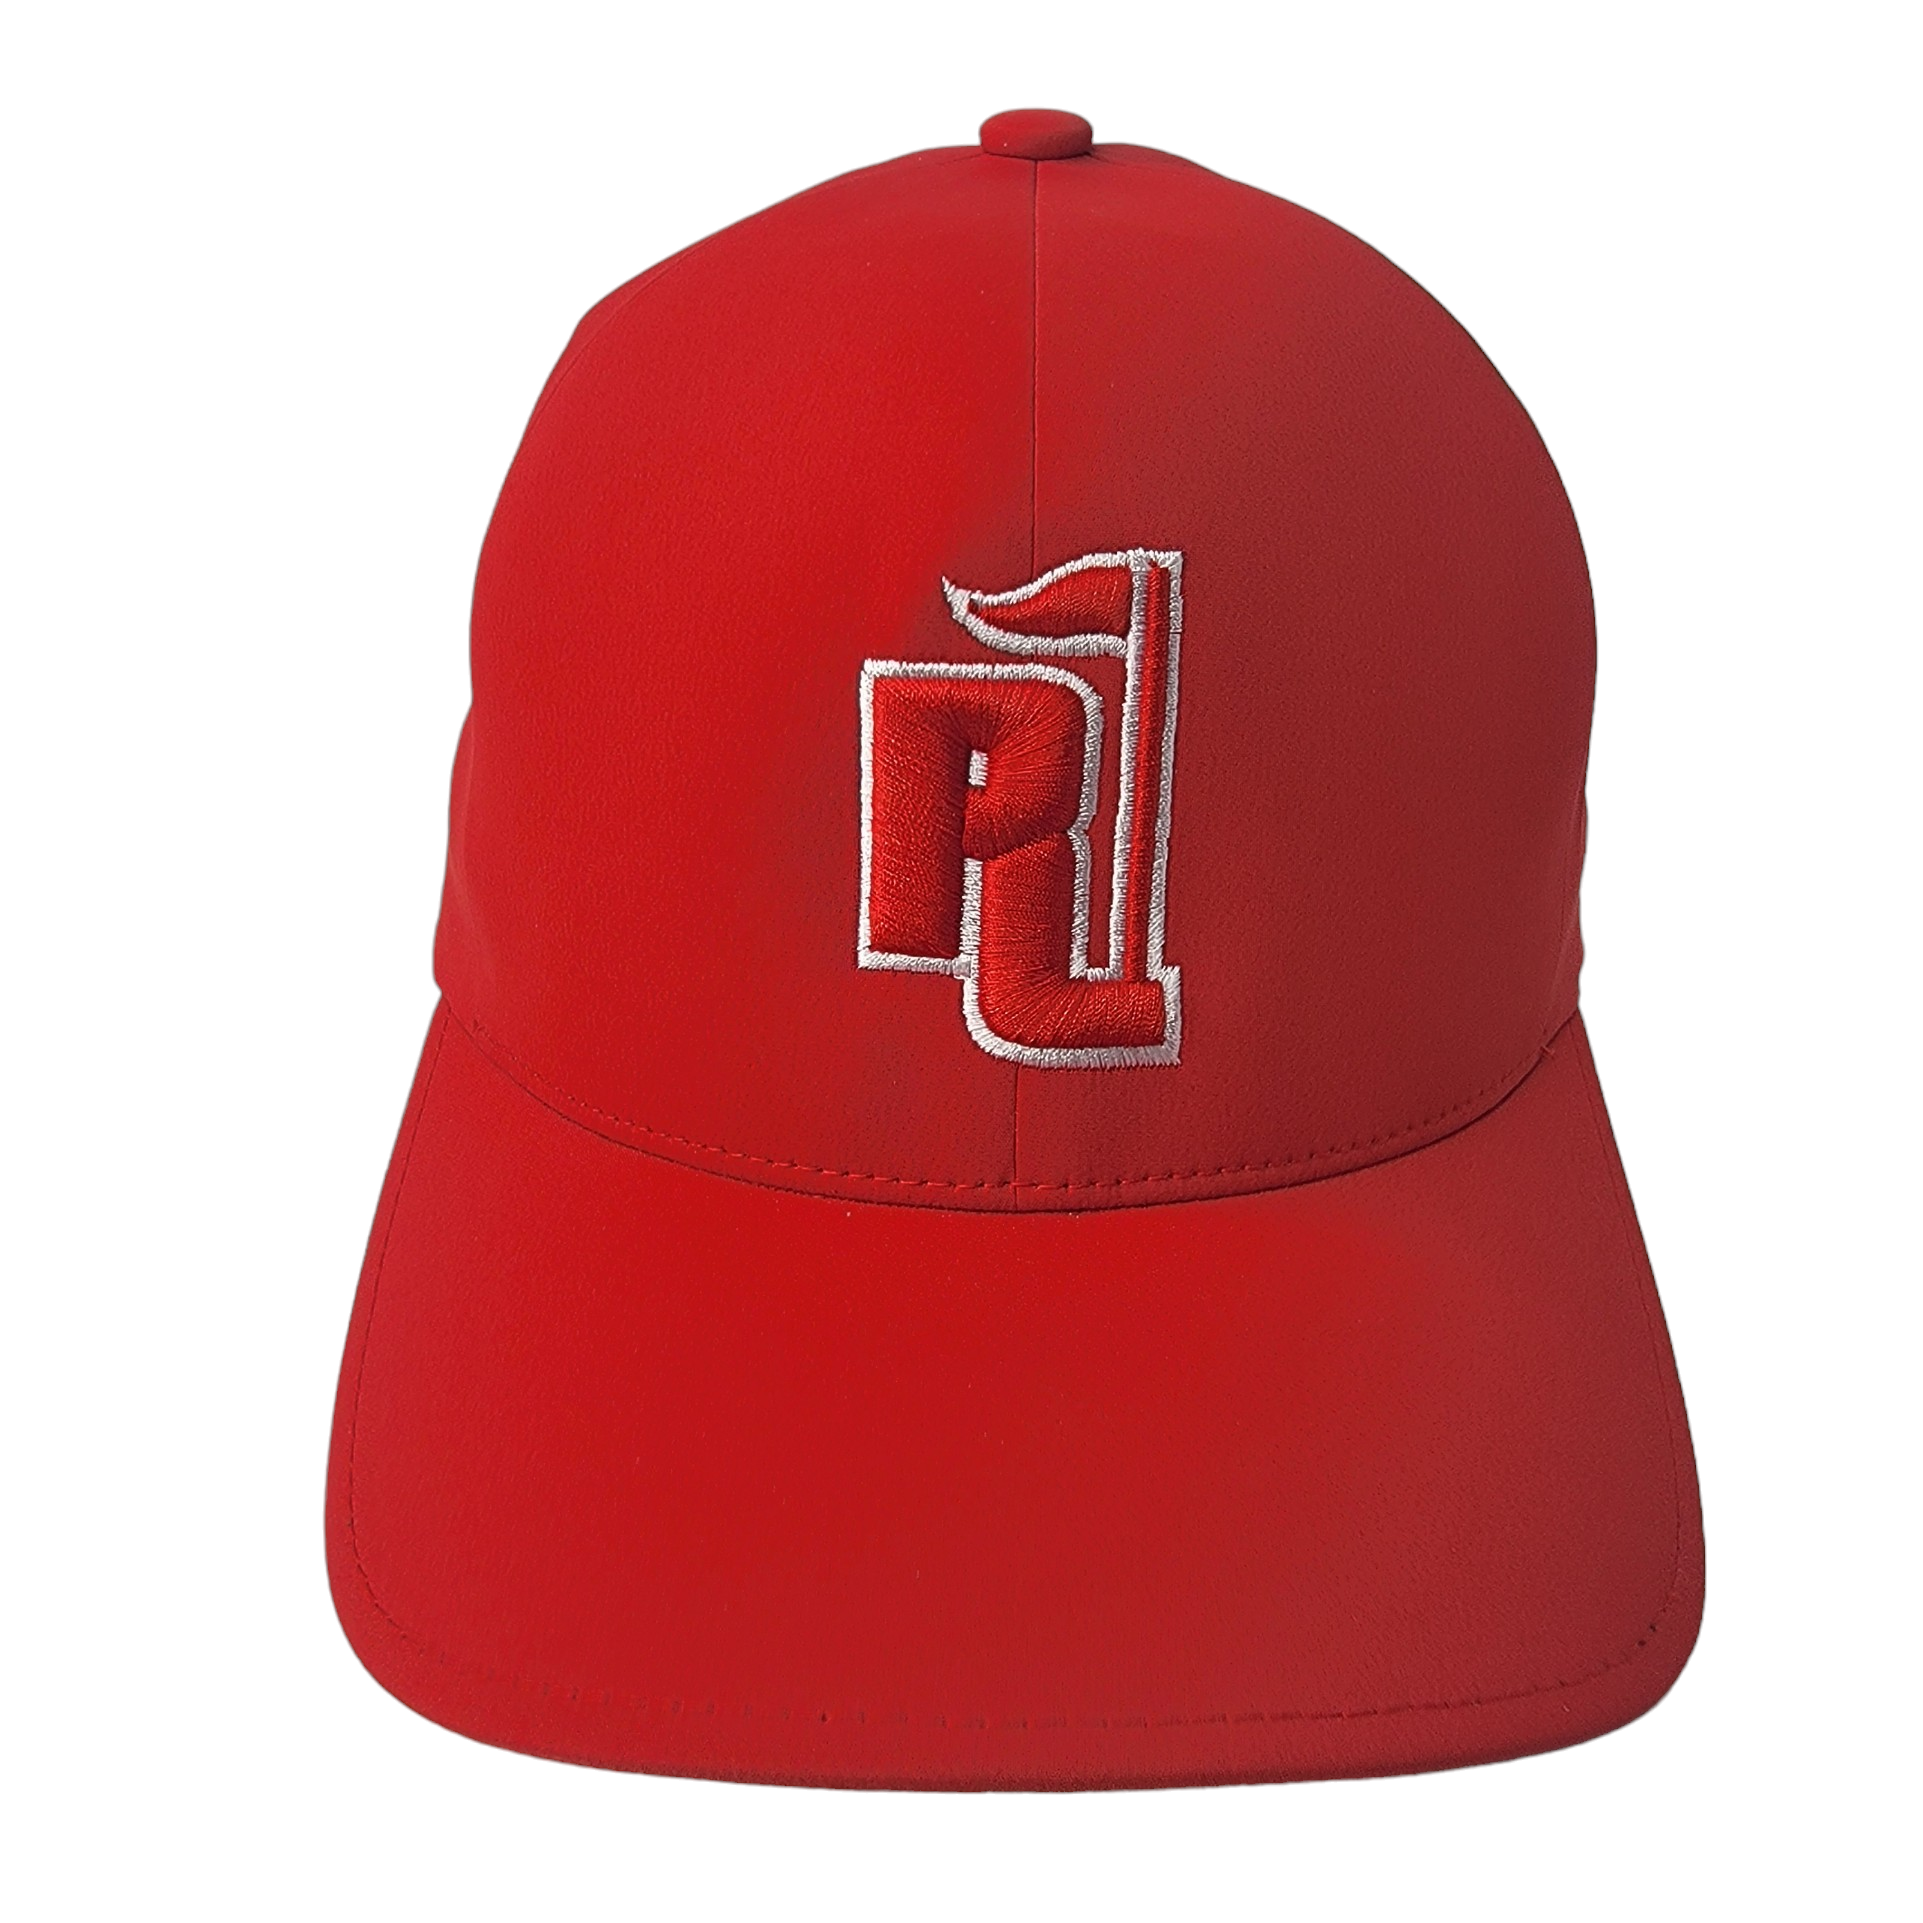 Raza Golf Red Fitted Hat with Red and White Logo